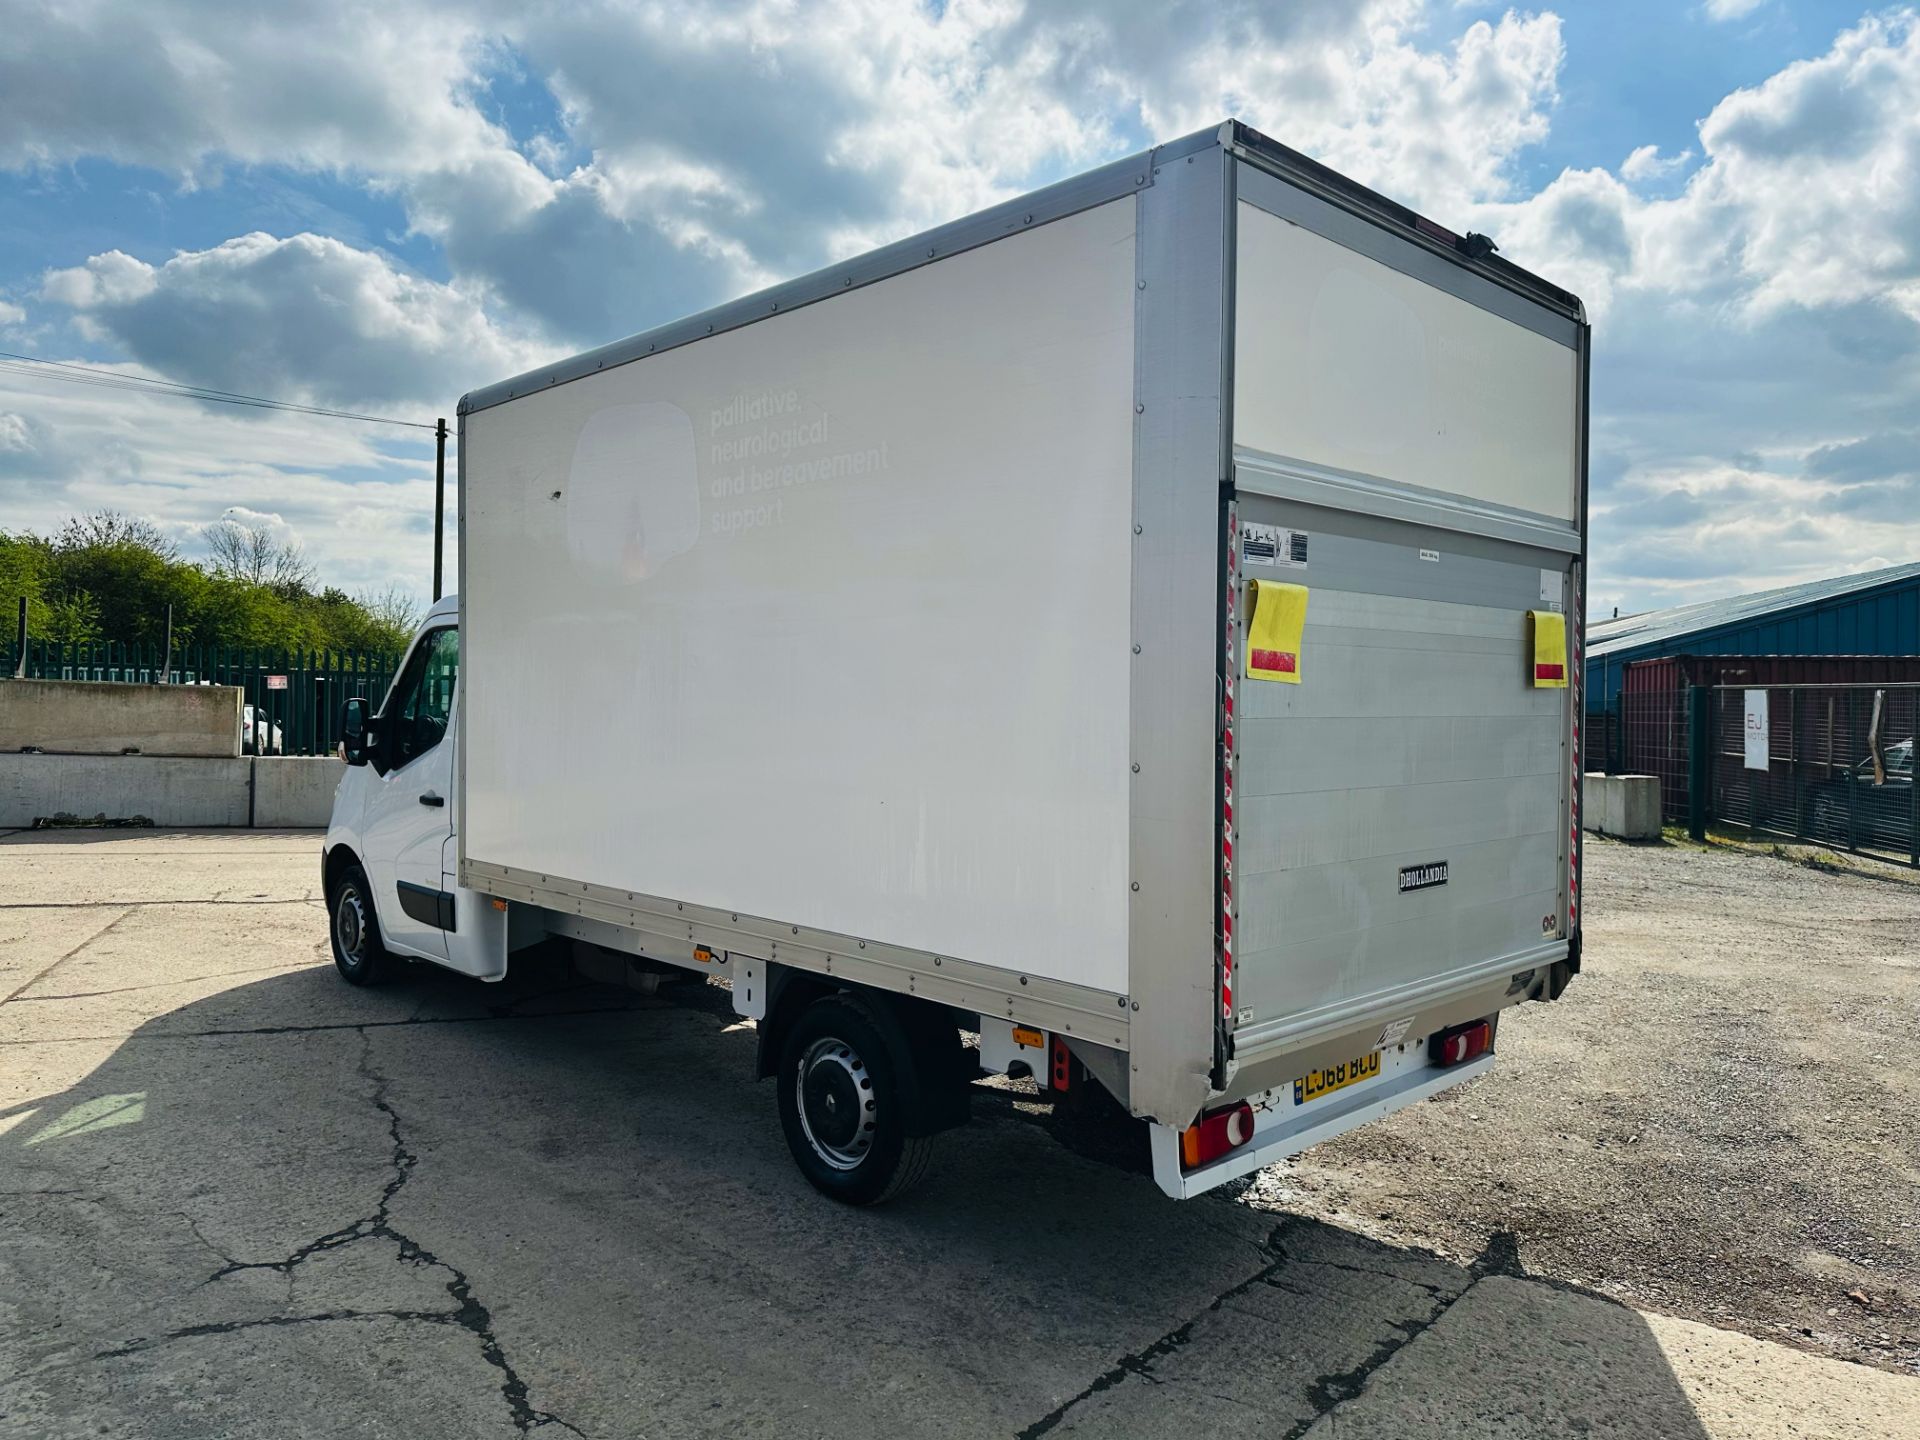 Renault Master 2.3 DCI 130 Business Edition Lwb (Luton / Box Van) - 2019 Model - Euro 6 - Tail Lift - Image 7 of 27